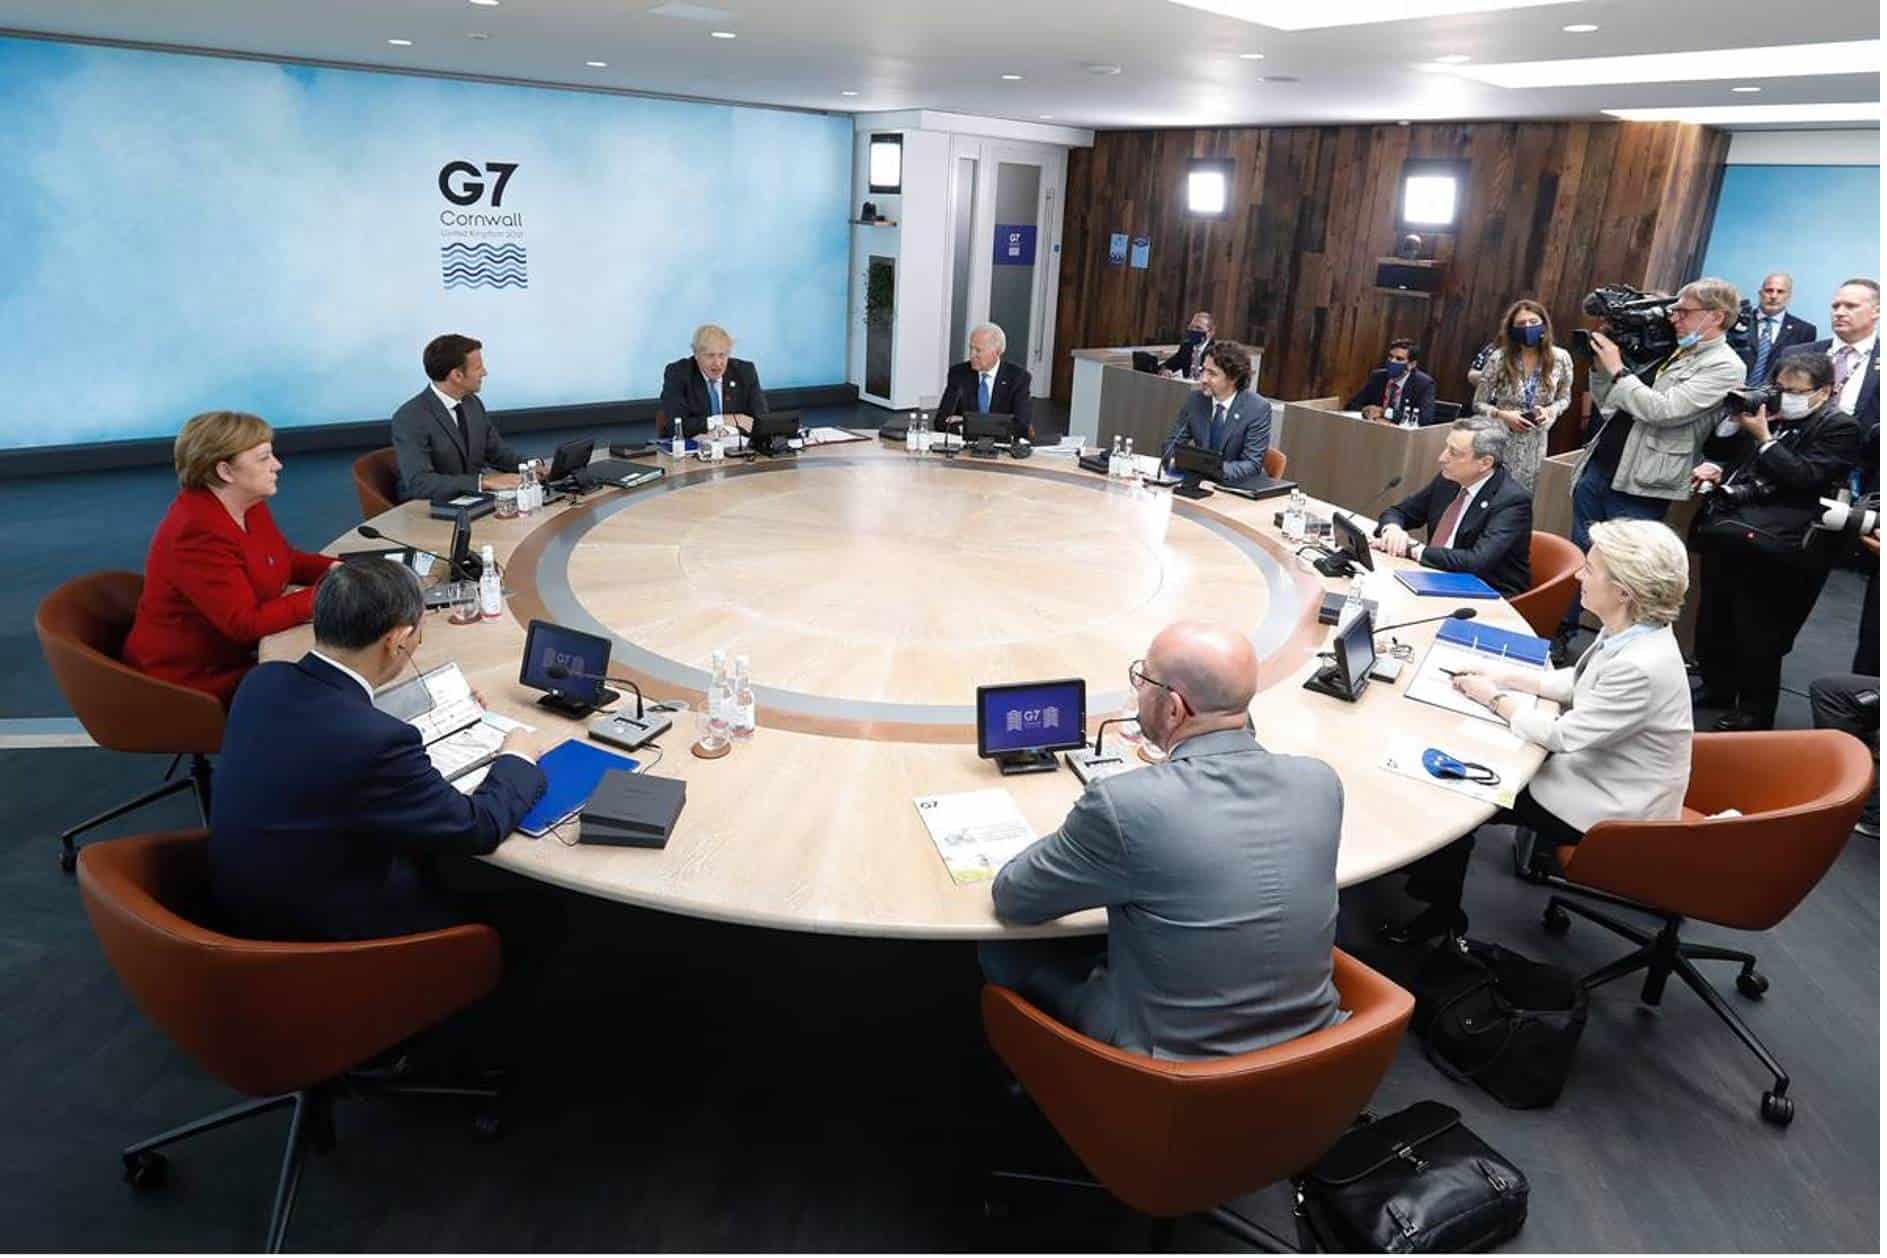 High-level politicians sat around an overly polished circular table at the G7 Summit.